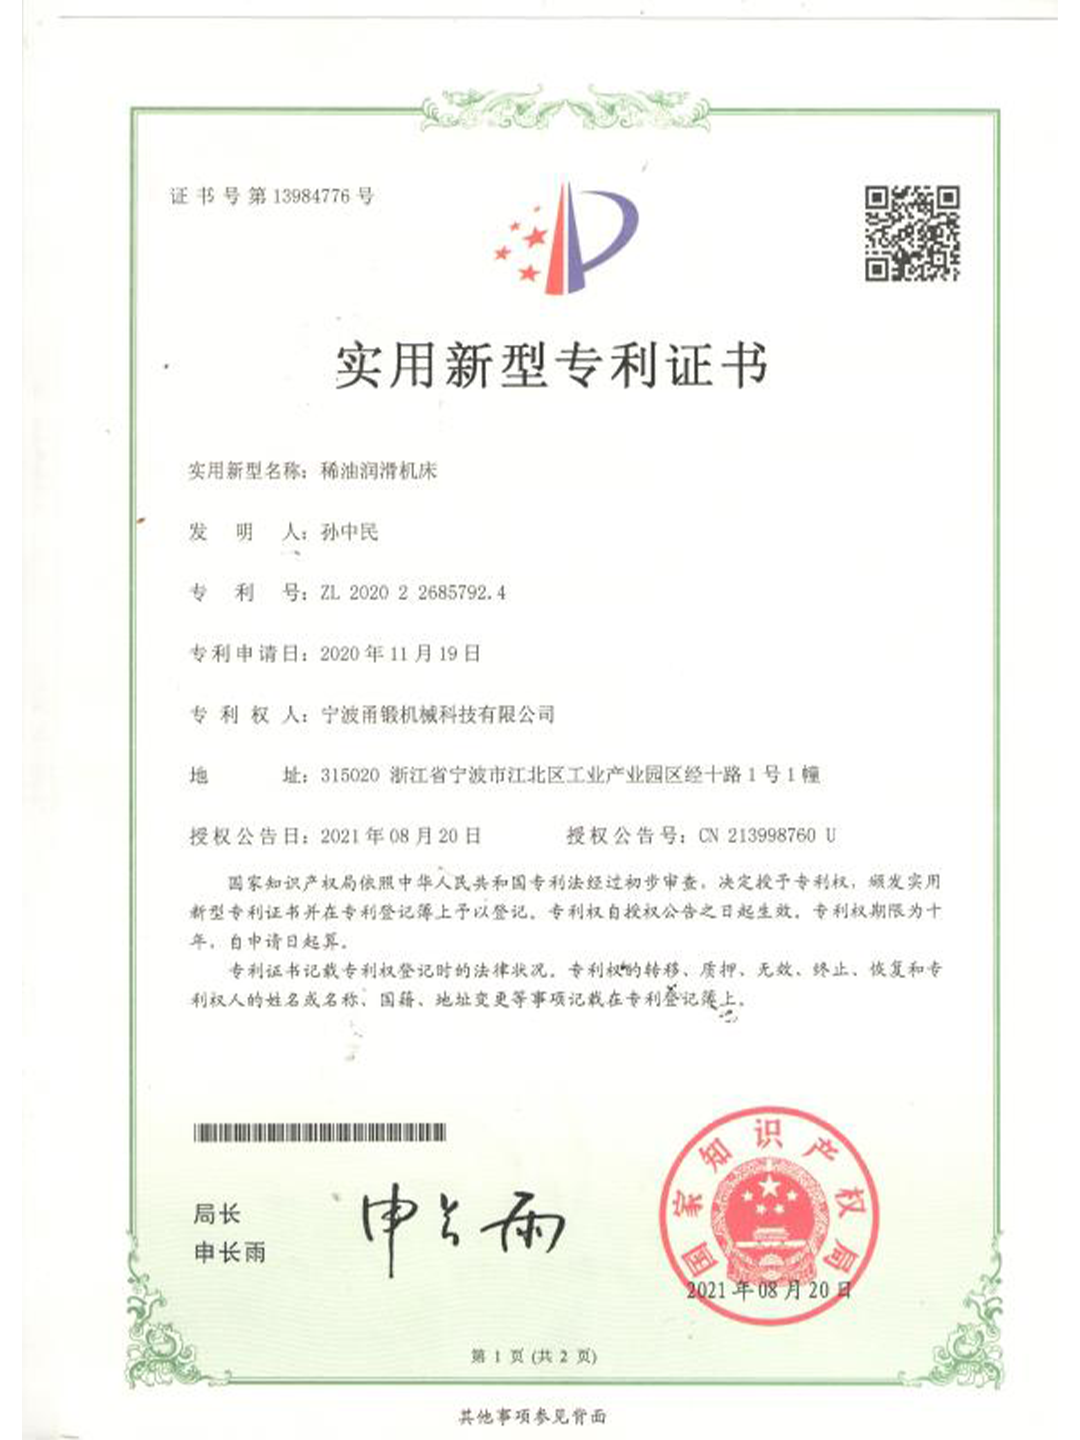 Thin oil lubrication machine tool - Patent certificate